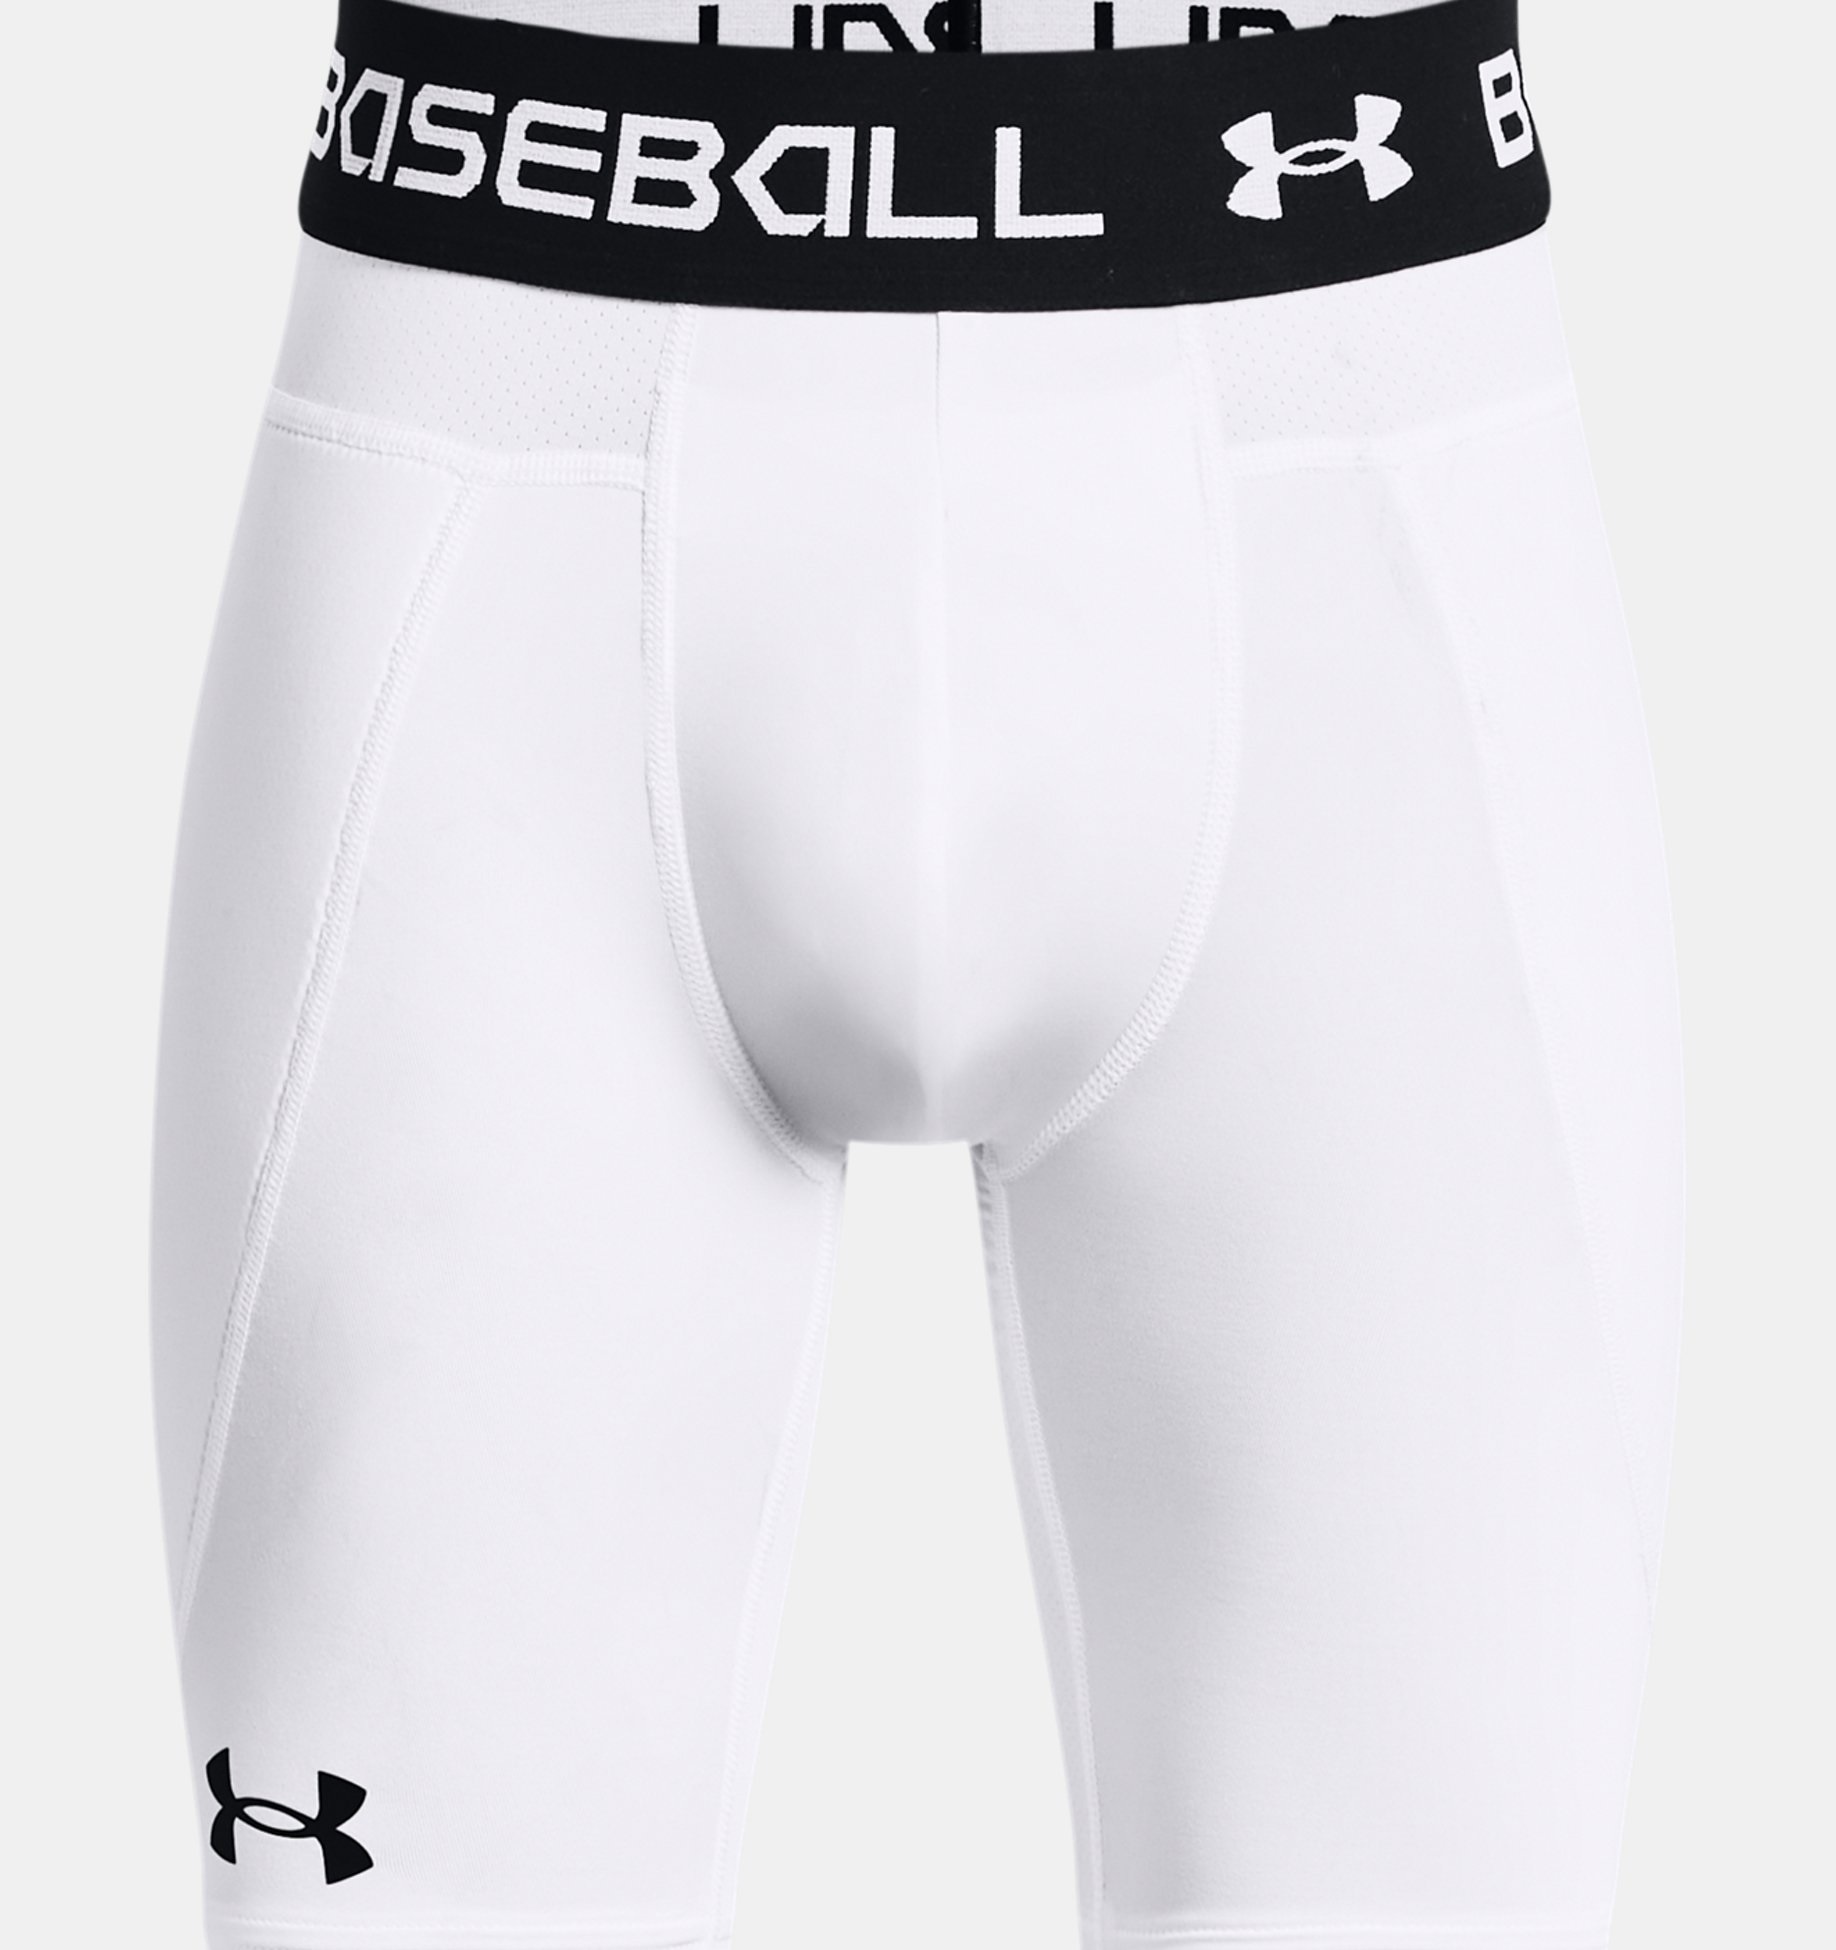 UNDER ARMOUR UTILITY SLIDING WITH CUP SHORTS YOUTH - Sportwheels Sports  Excellence